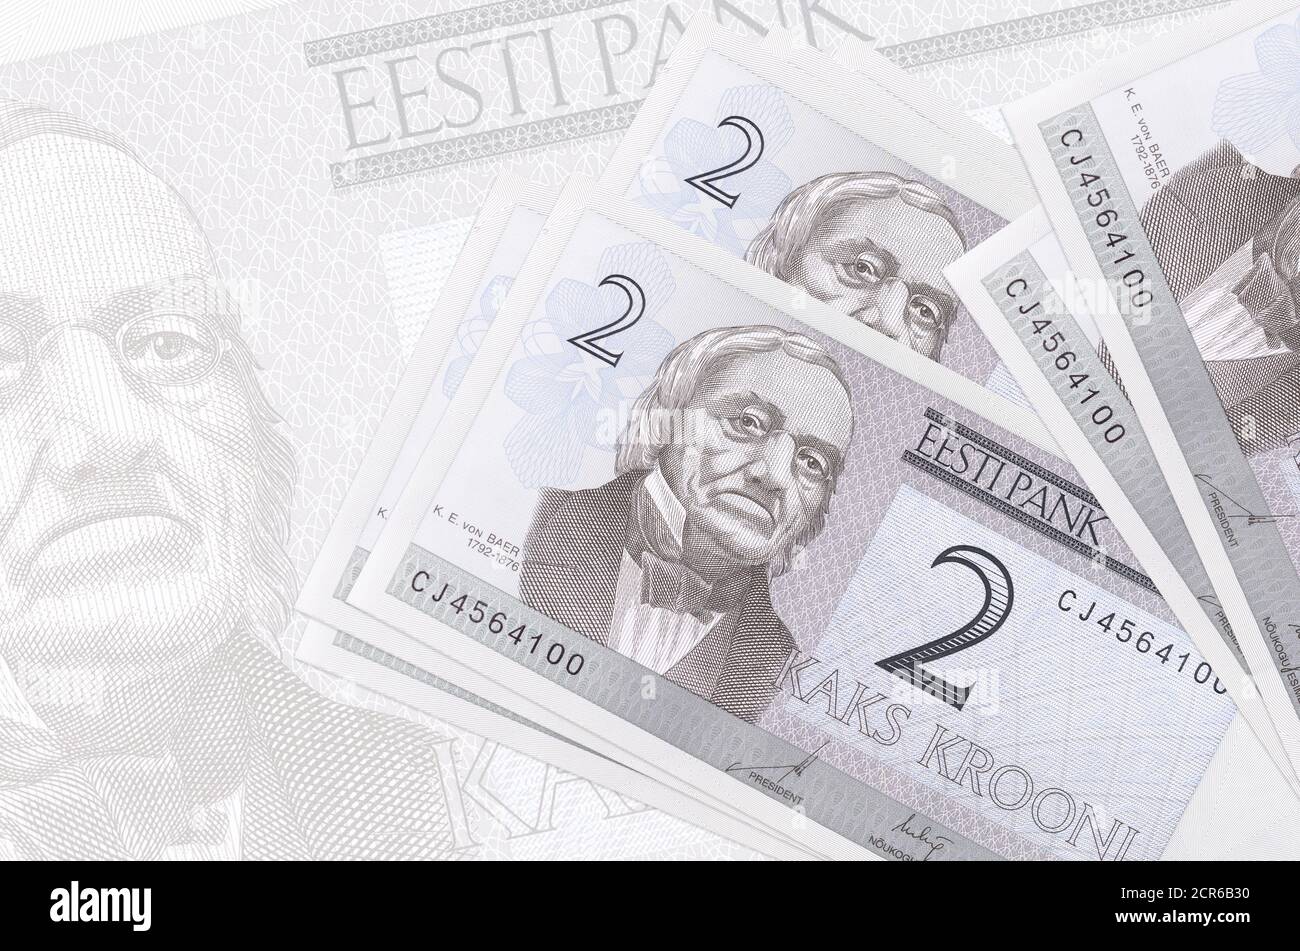 2 Estonian kroon bills lies in stack on background of big semi-transparent banknote. Abstract presentation of national currency. Business concept Stock Photo